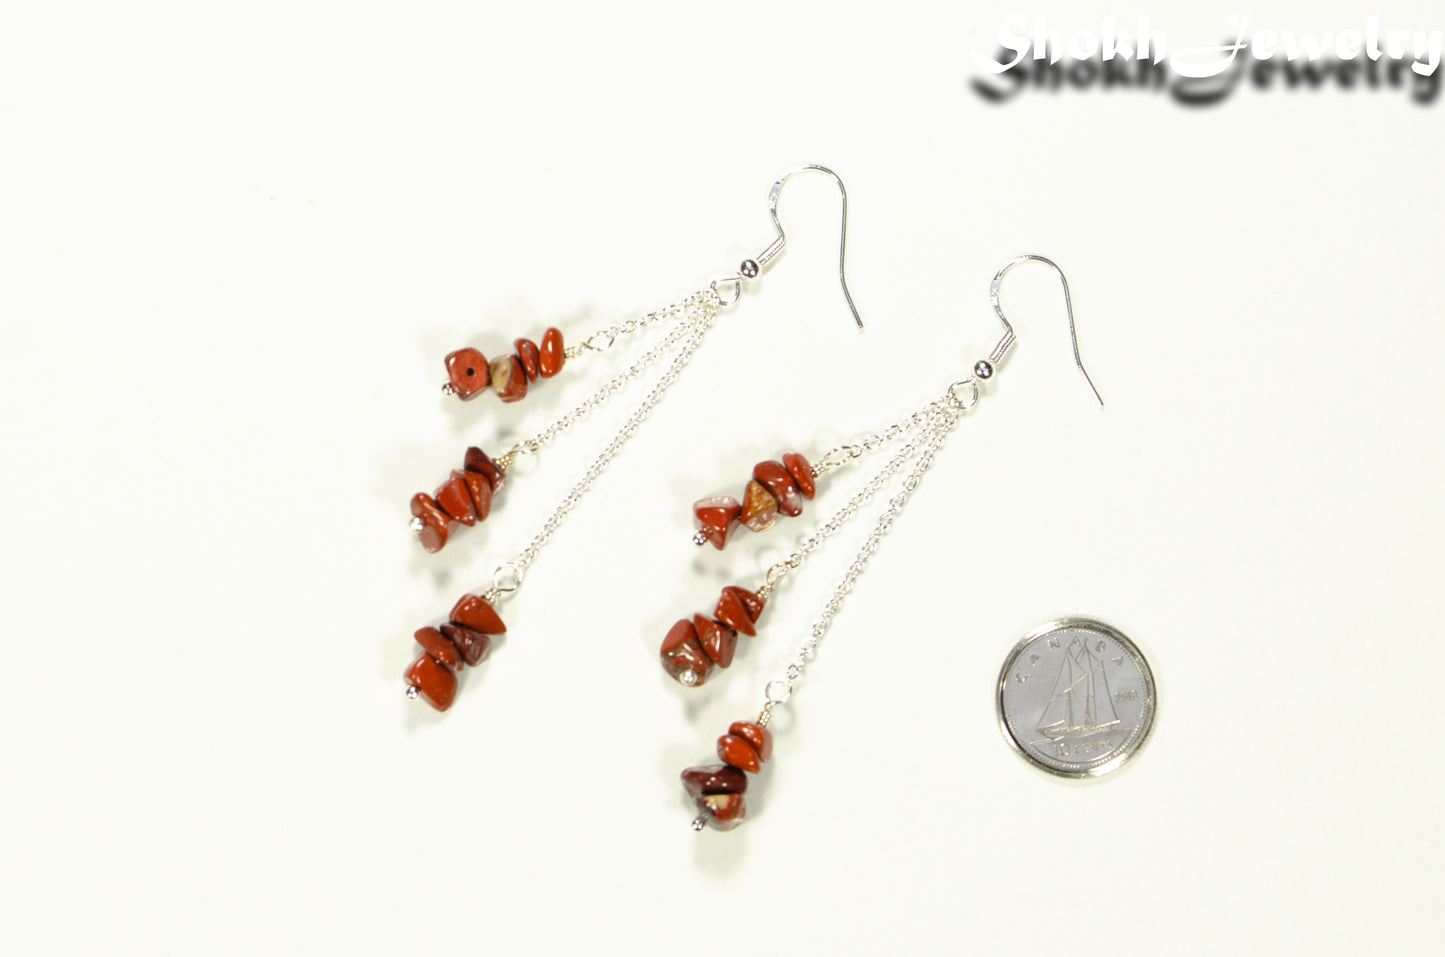 Long Silver Plated Chain and Red Jasper Chip Earrings beside a dime.